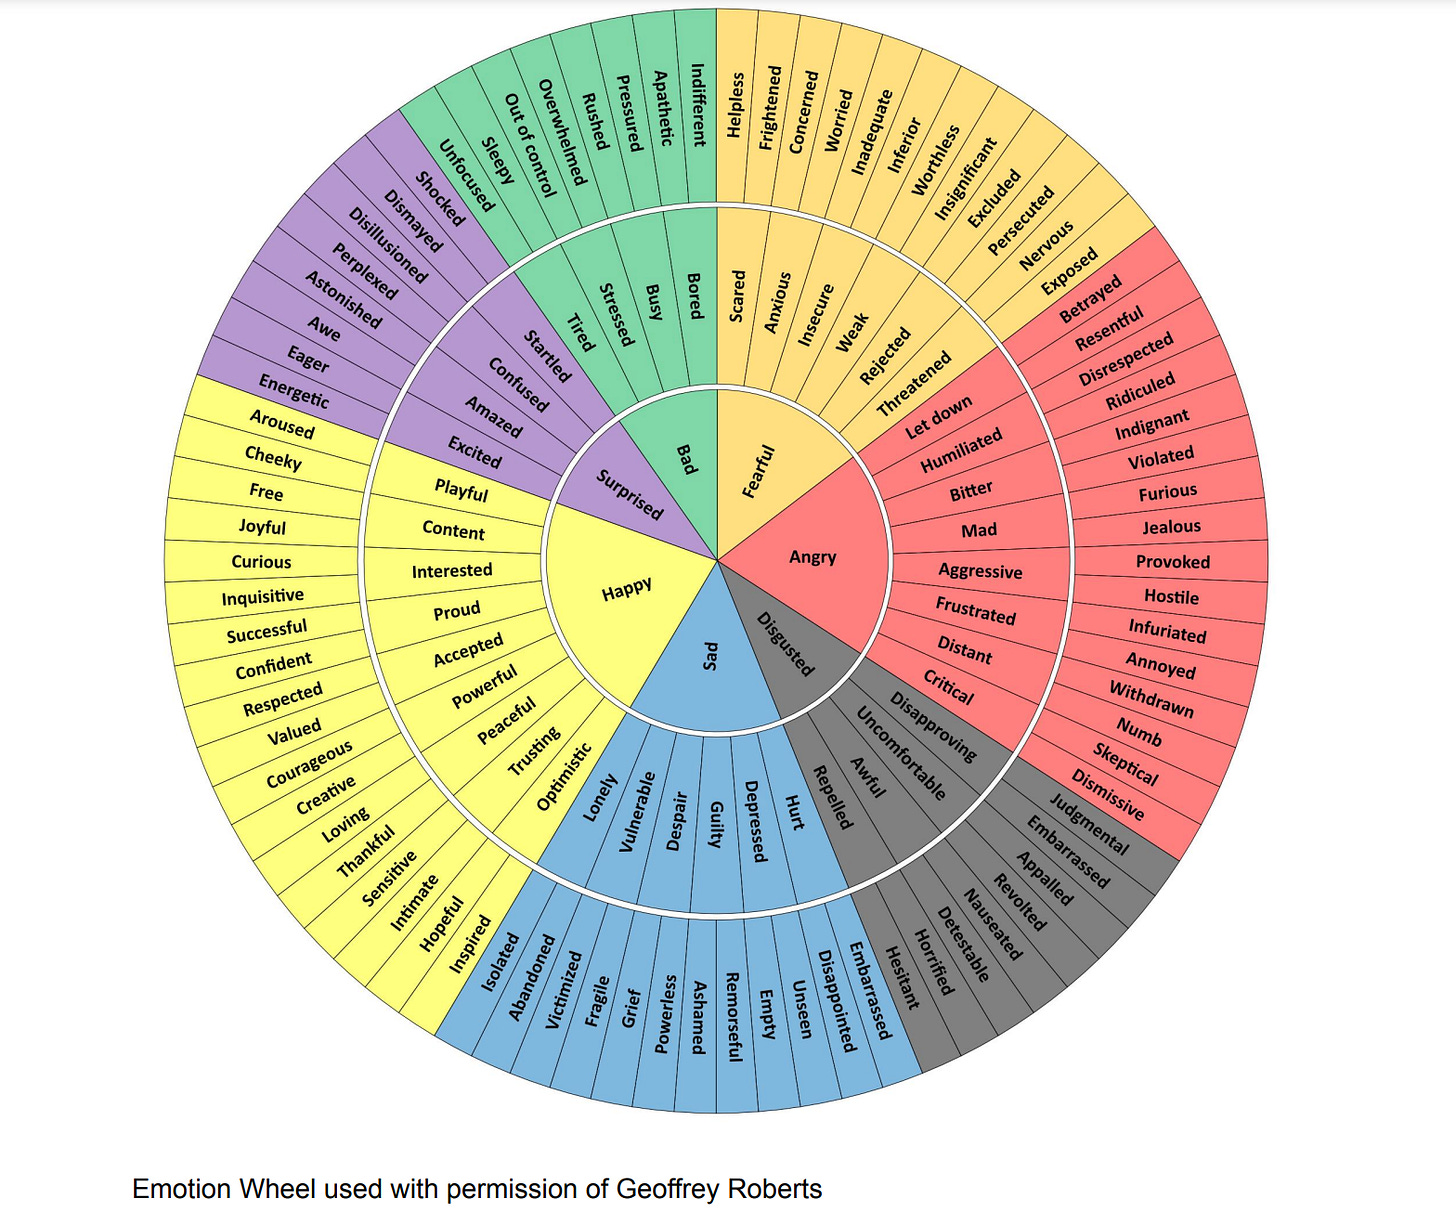 Emotion Wheel used with permission of Geoffrey Roberts